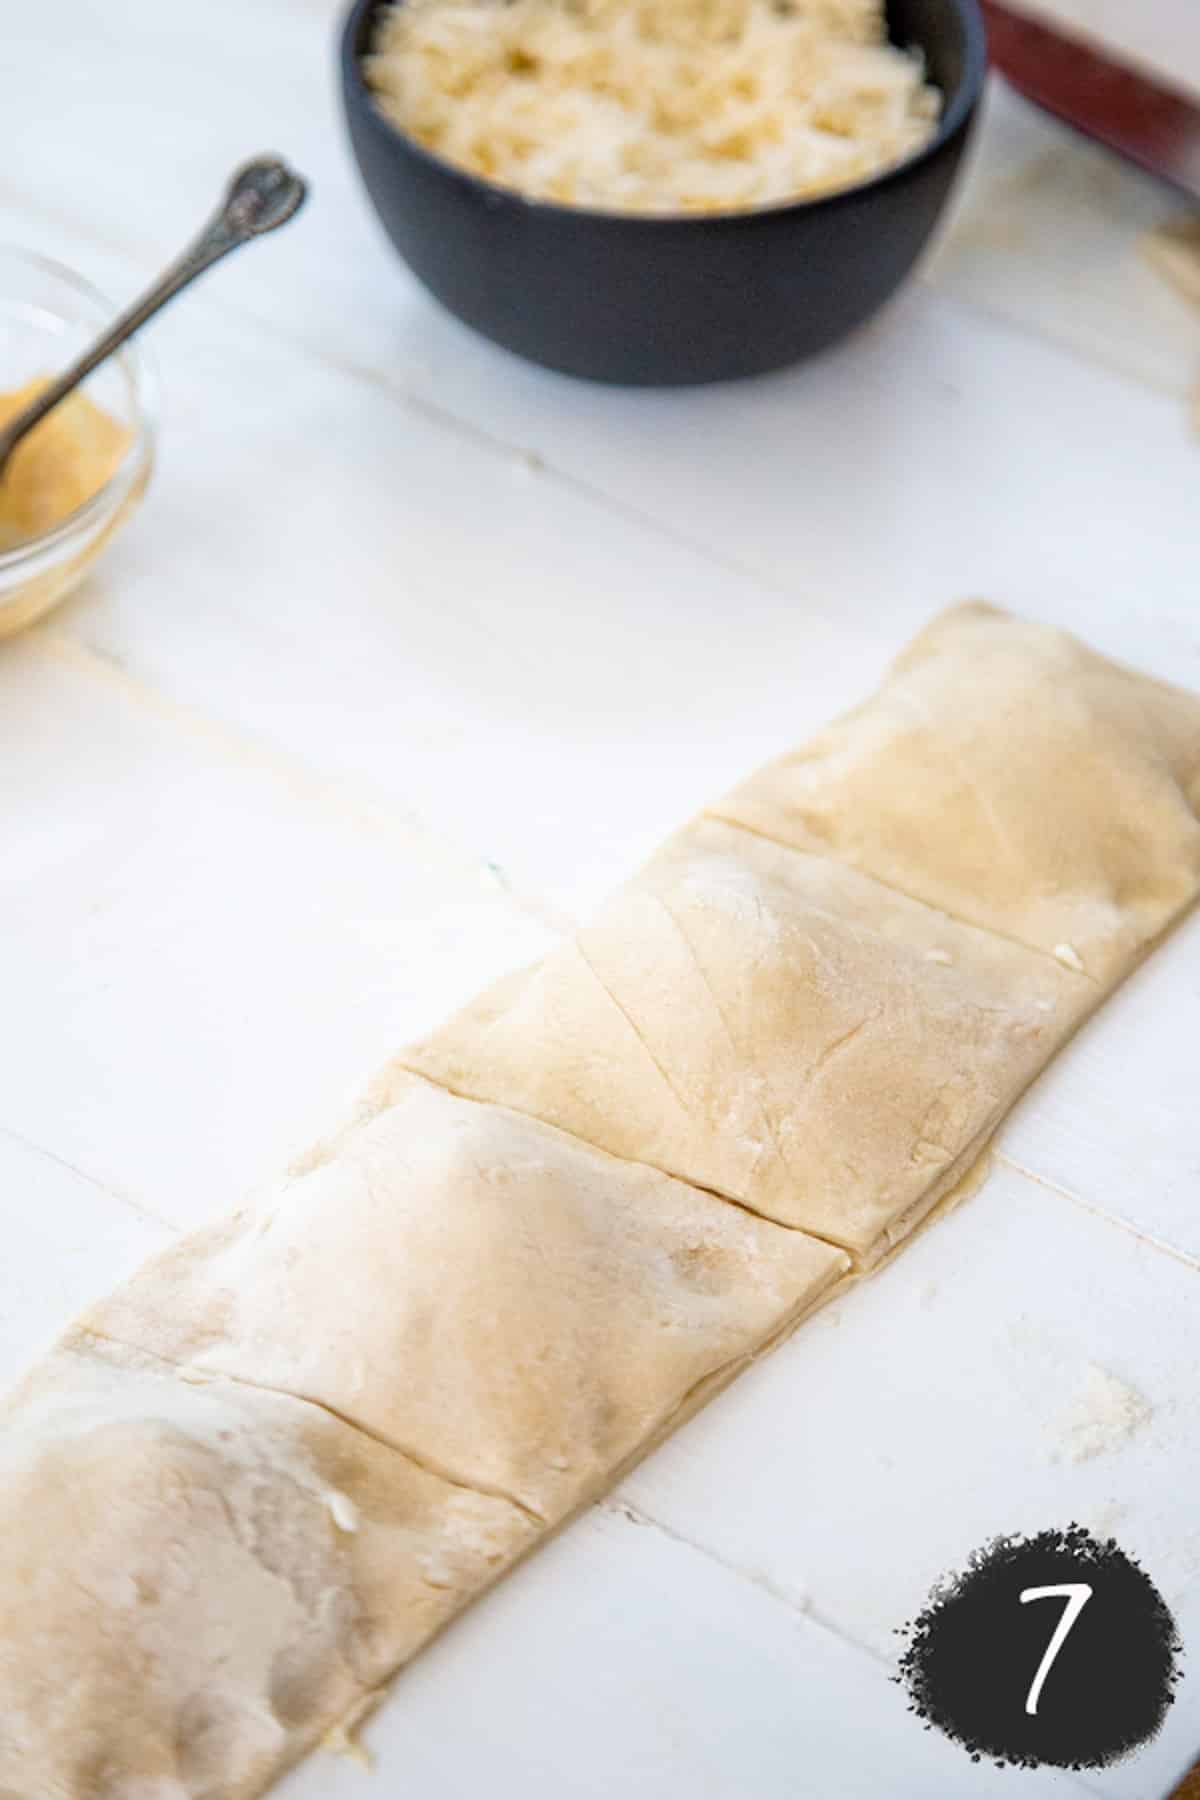 A log of pizza dough filled with calzone filling that's been sliced into individual squares.